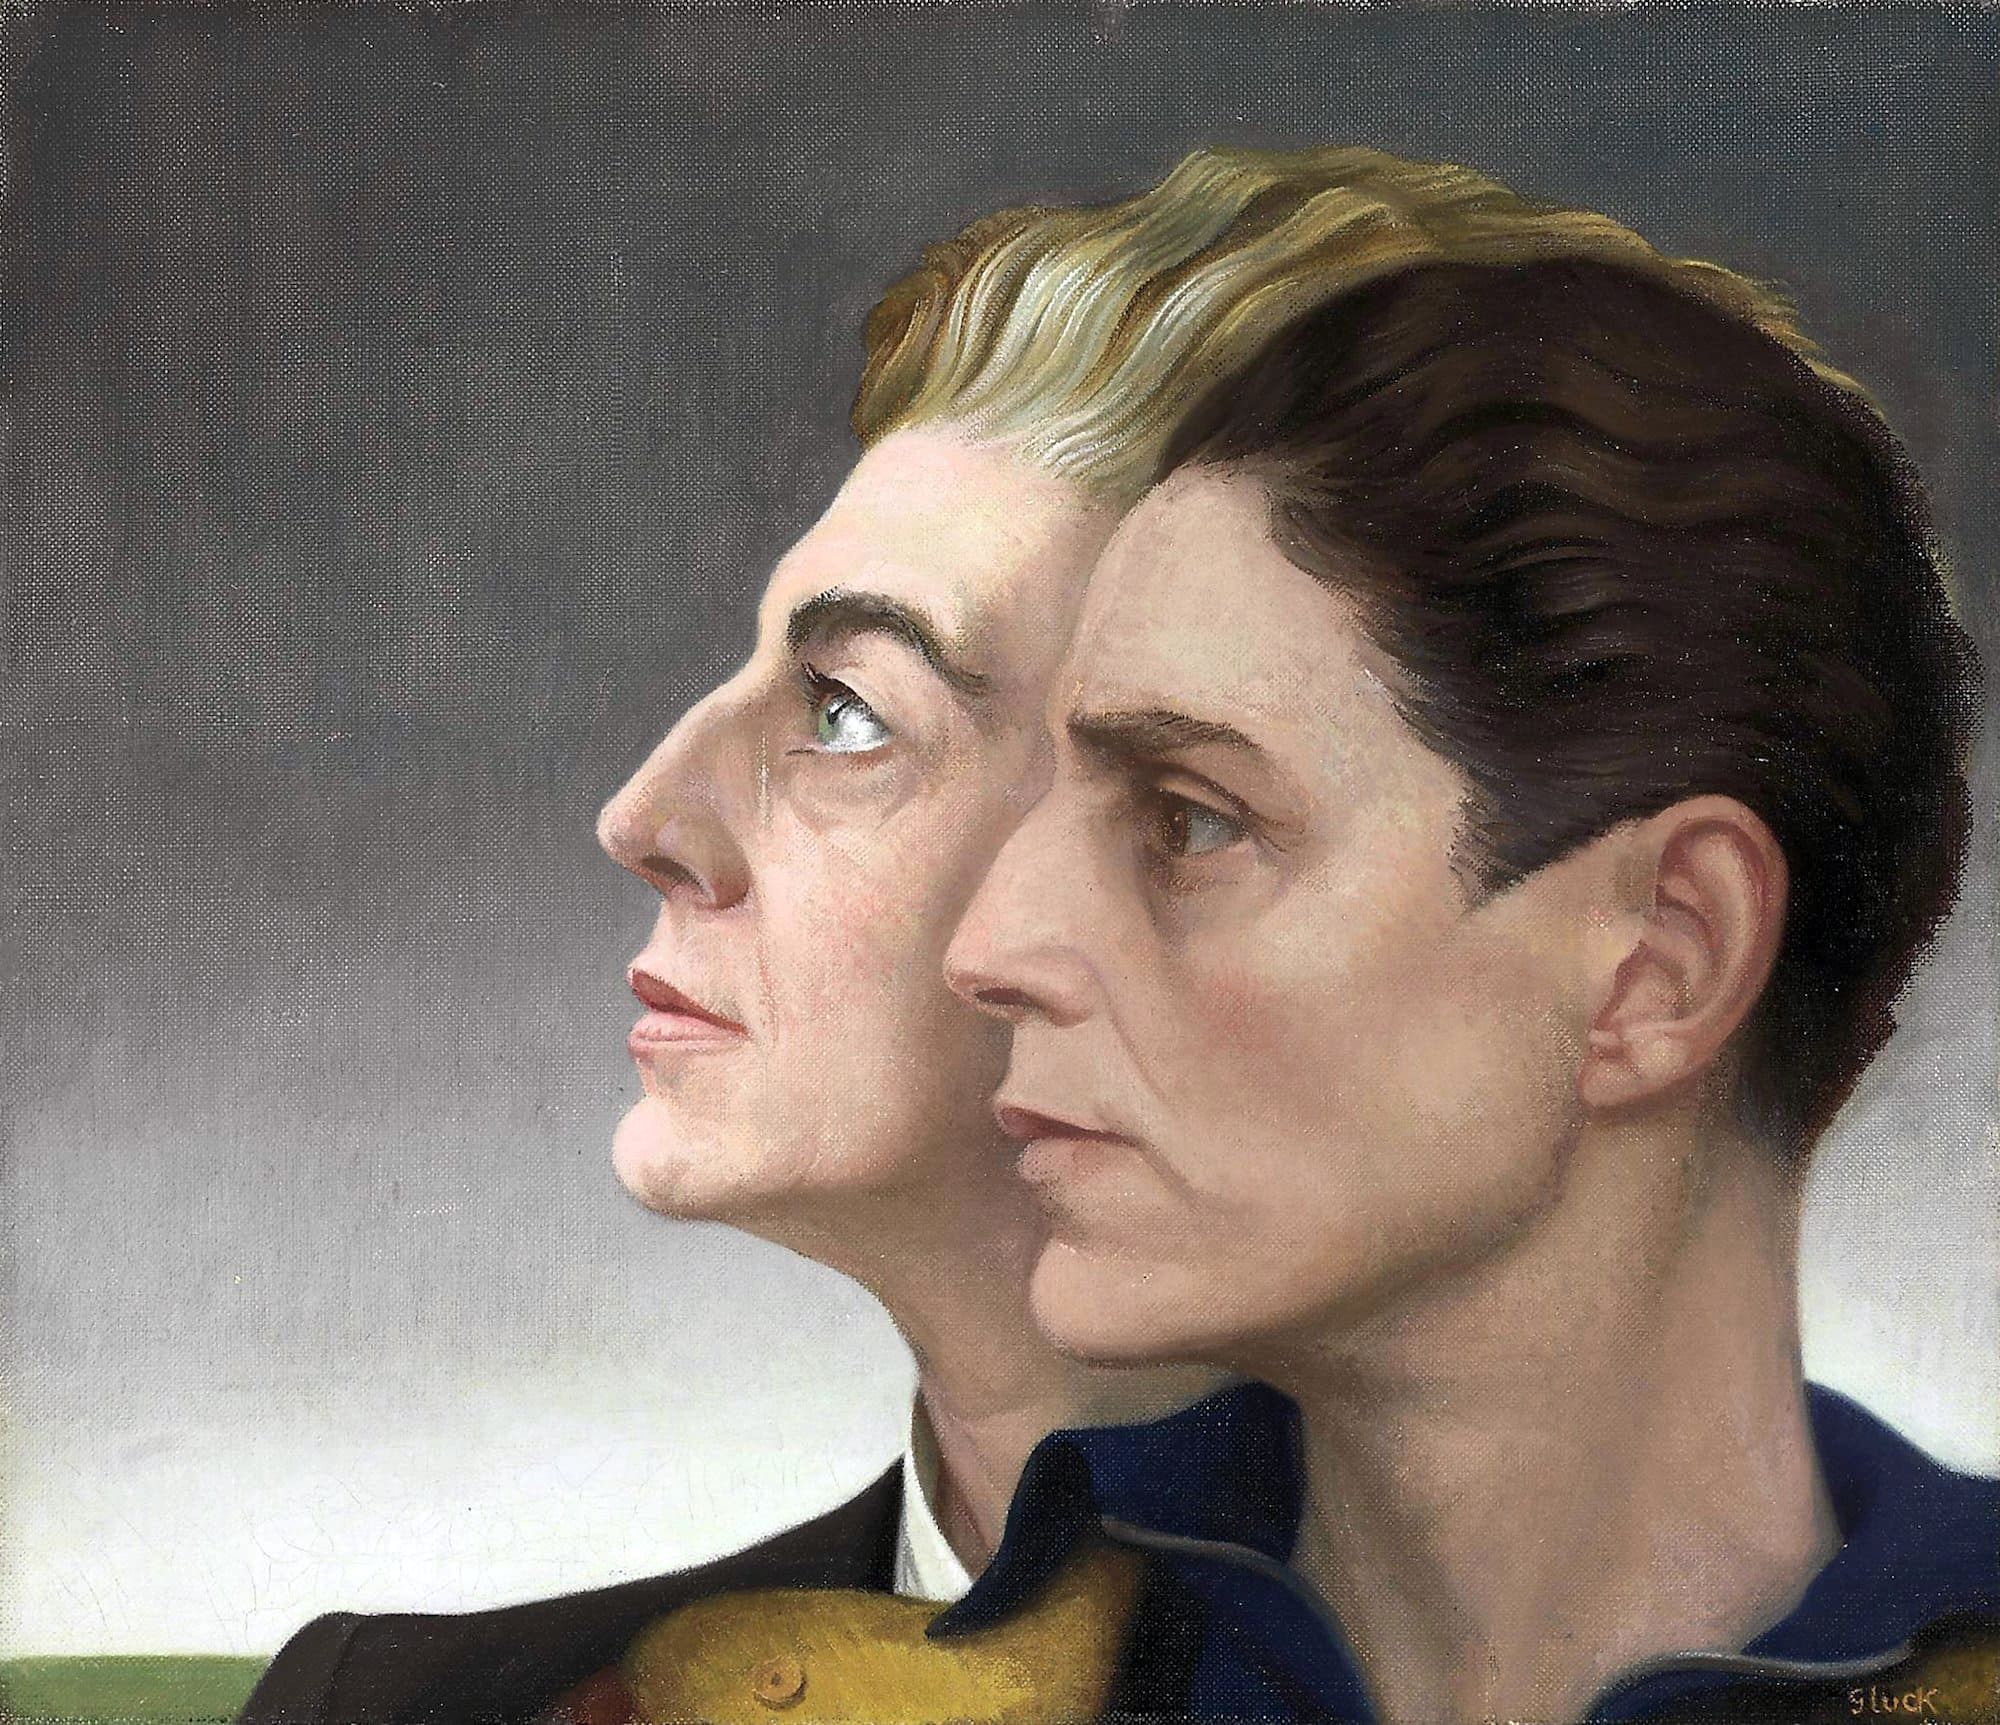 Profile of two women with short hair